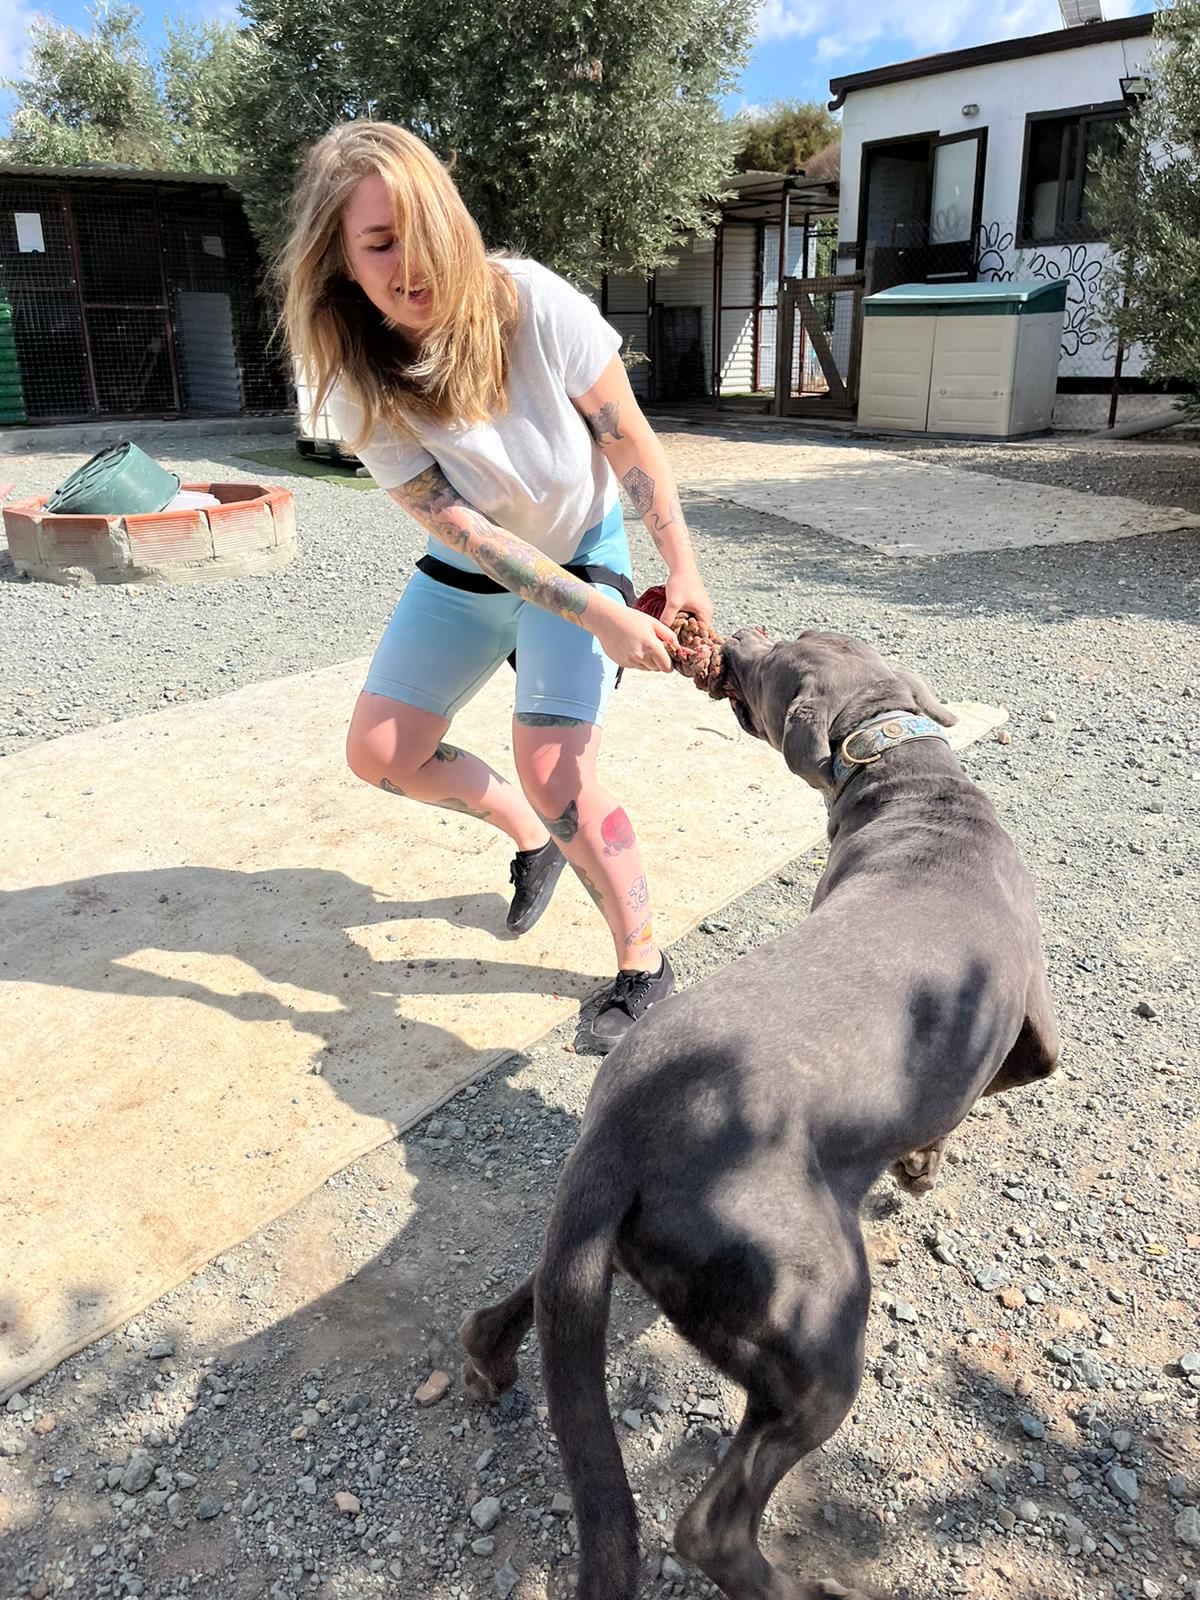 Woman plays with large grey dog